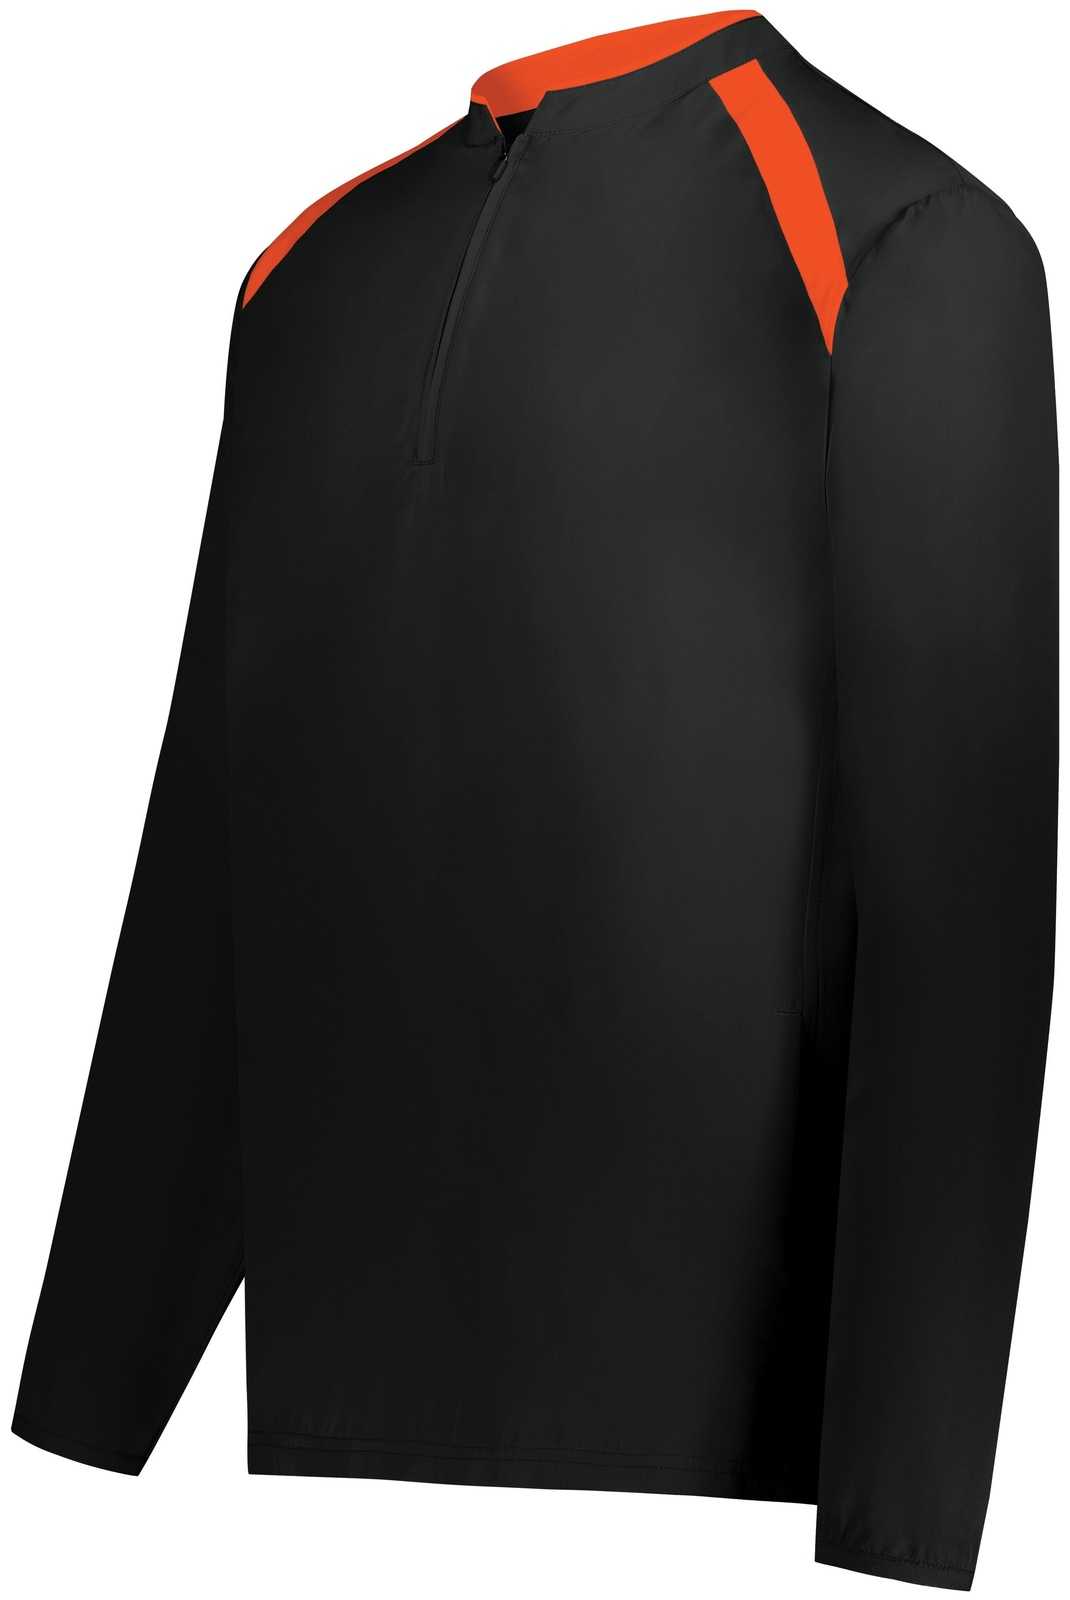 Holloway 229695 Youth Clubhouse Pullover - Black Orange - HIT a Double